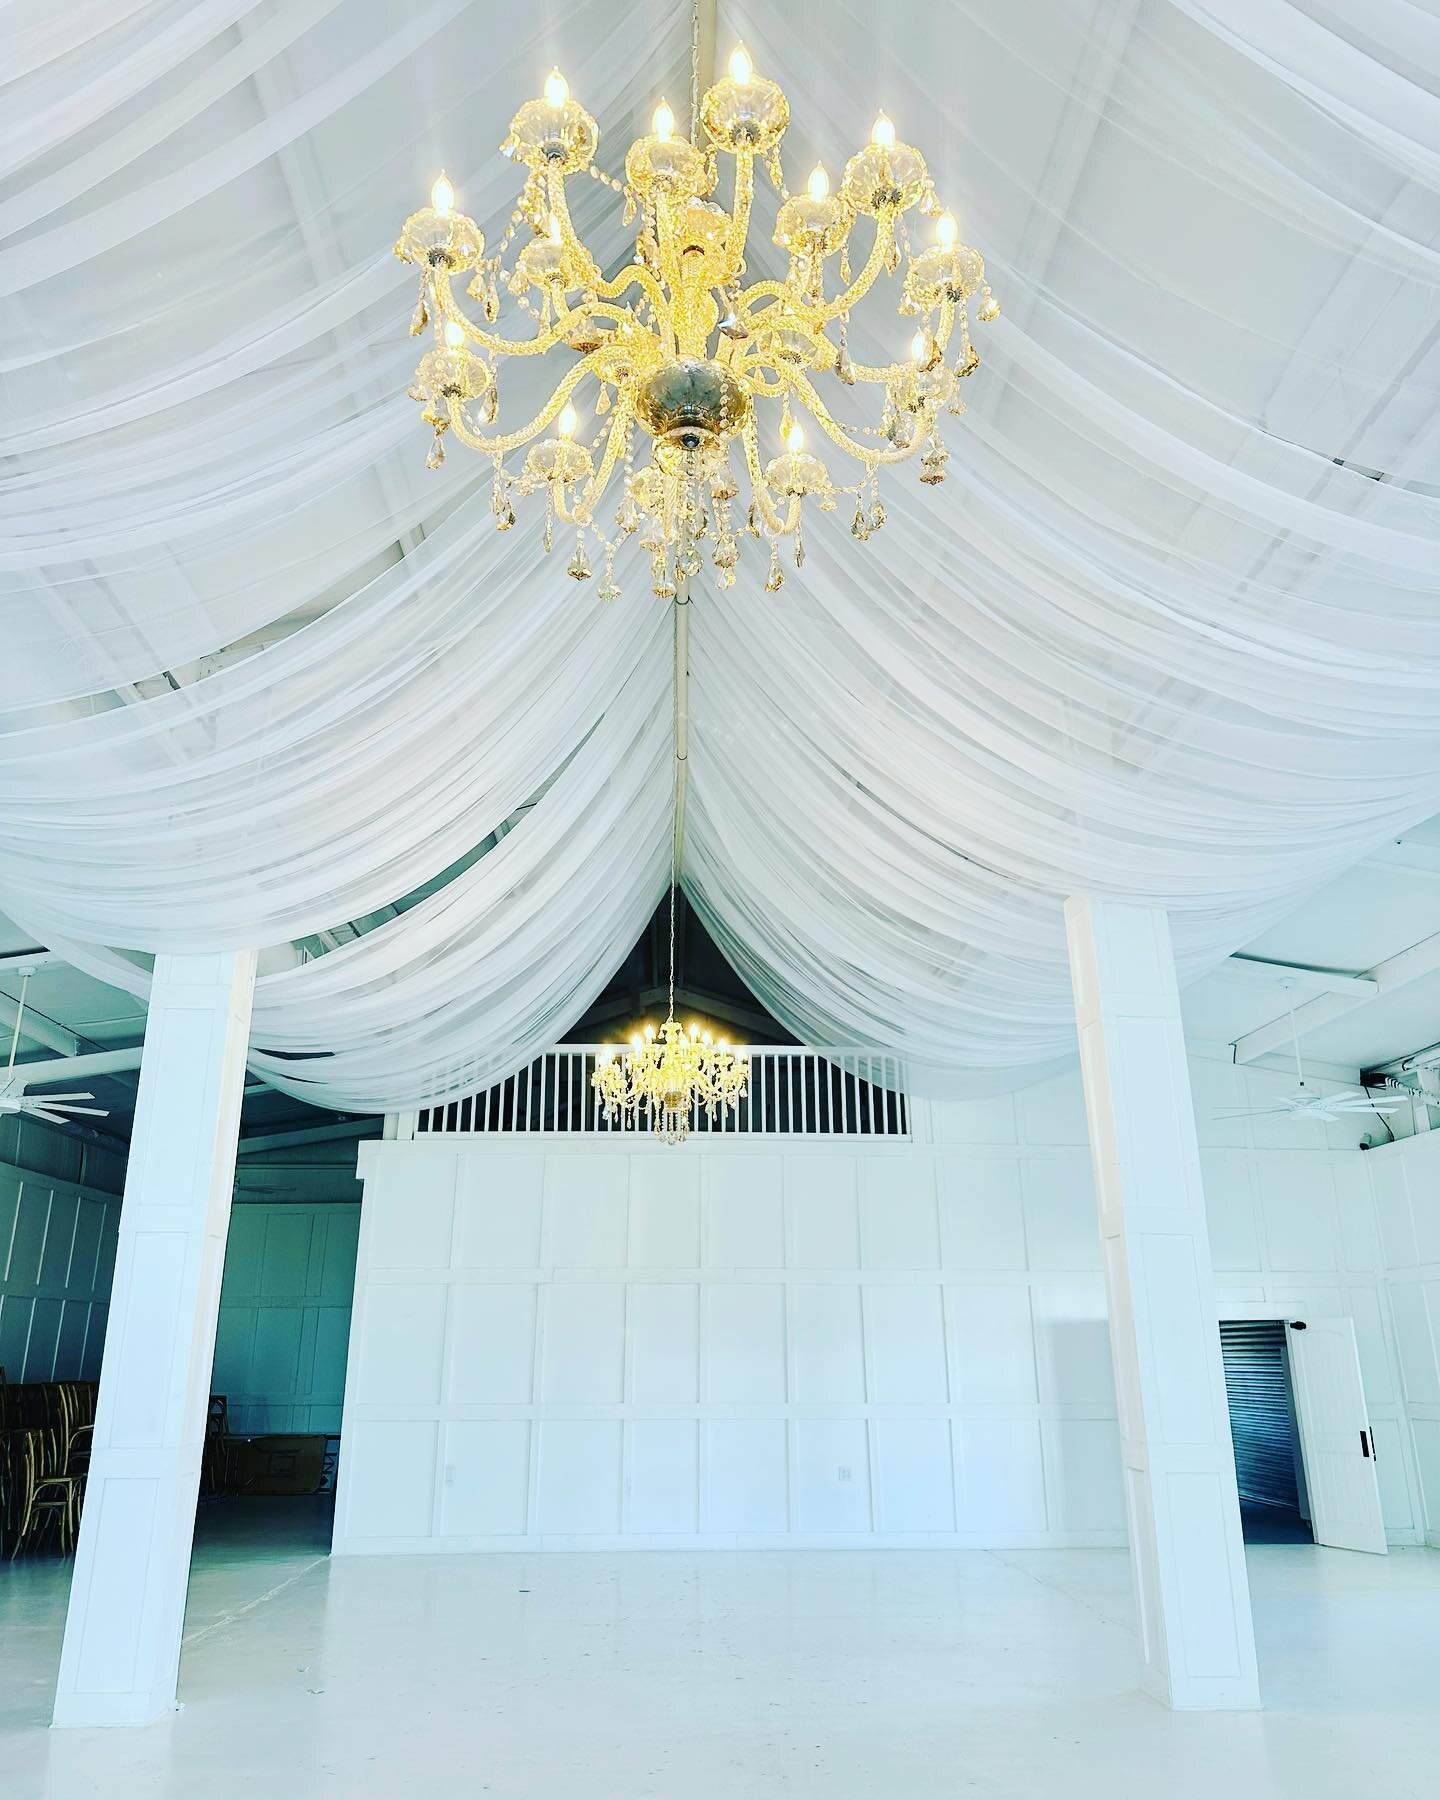 Are you looking for an elegant venue? 

We have white walls, white doors, white ceilings, AND white floors! Peep the soft touch we just added to our ceilings. 🤍

What are you waiting for? Head over to our website to schedule a tour now!

www.thegrac